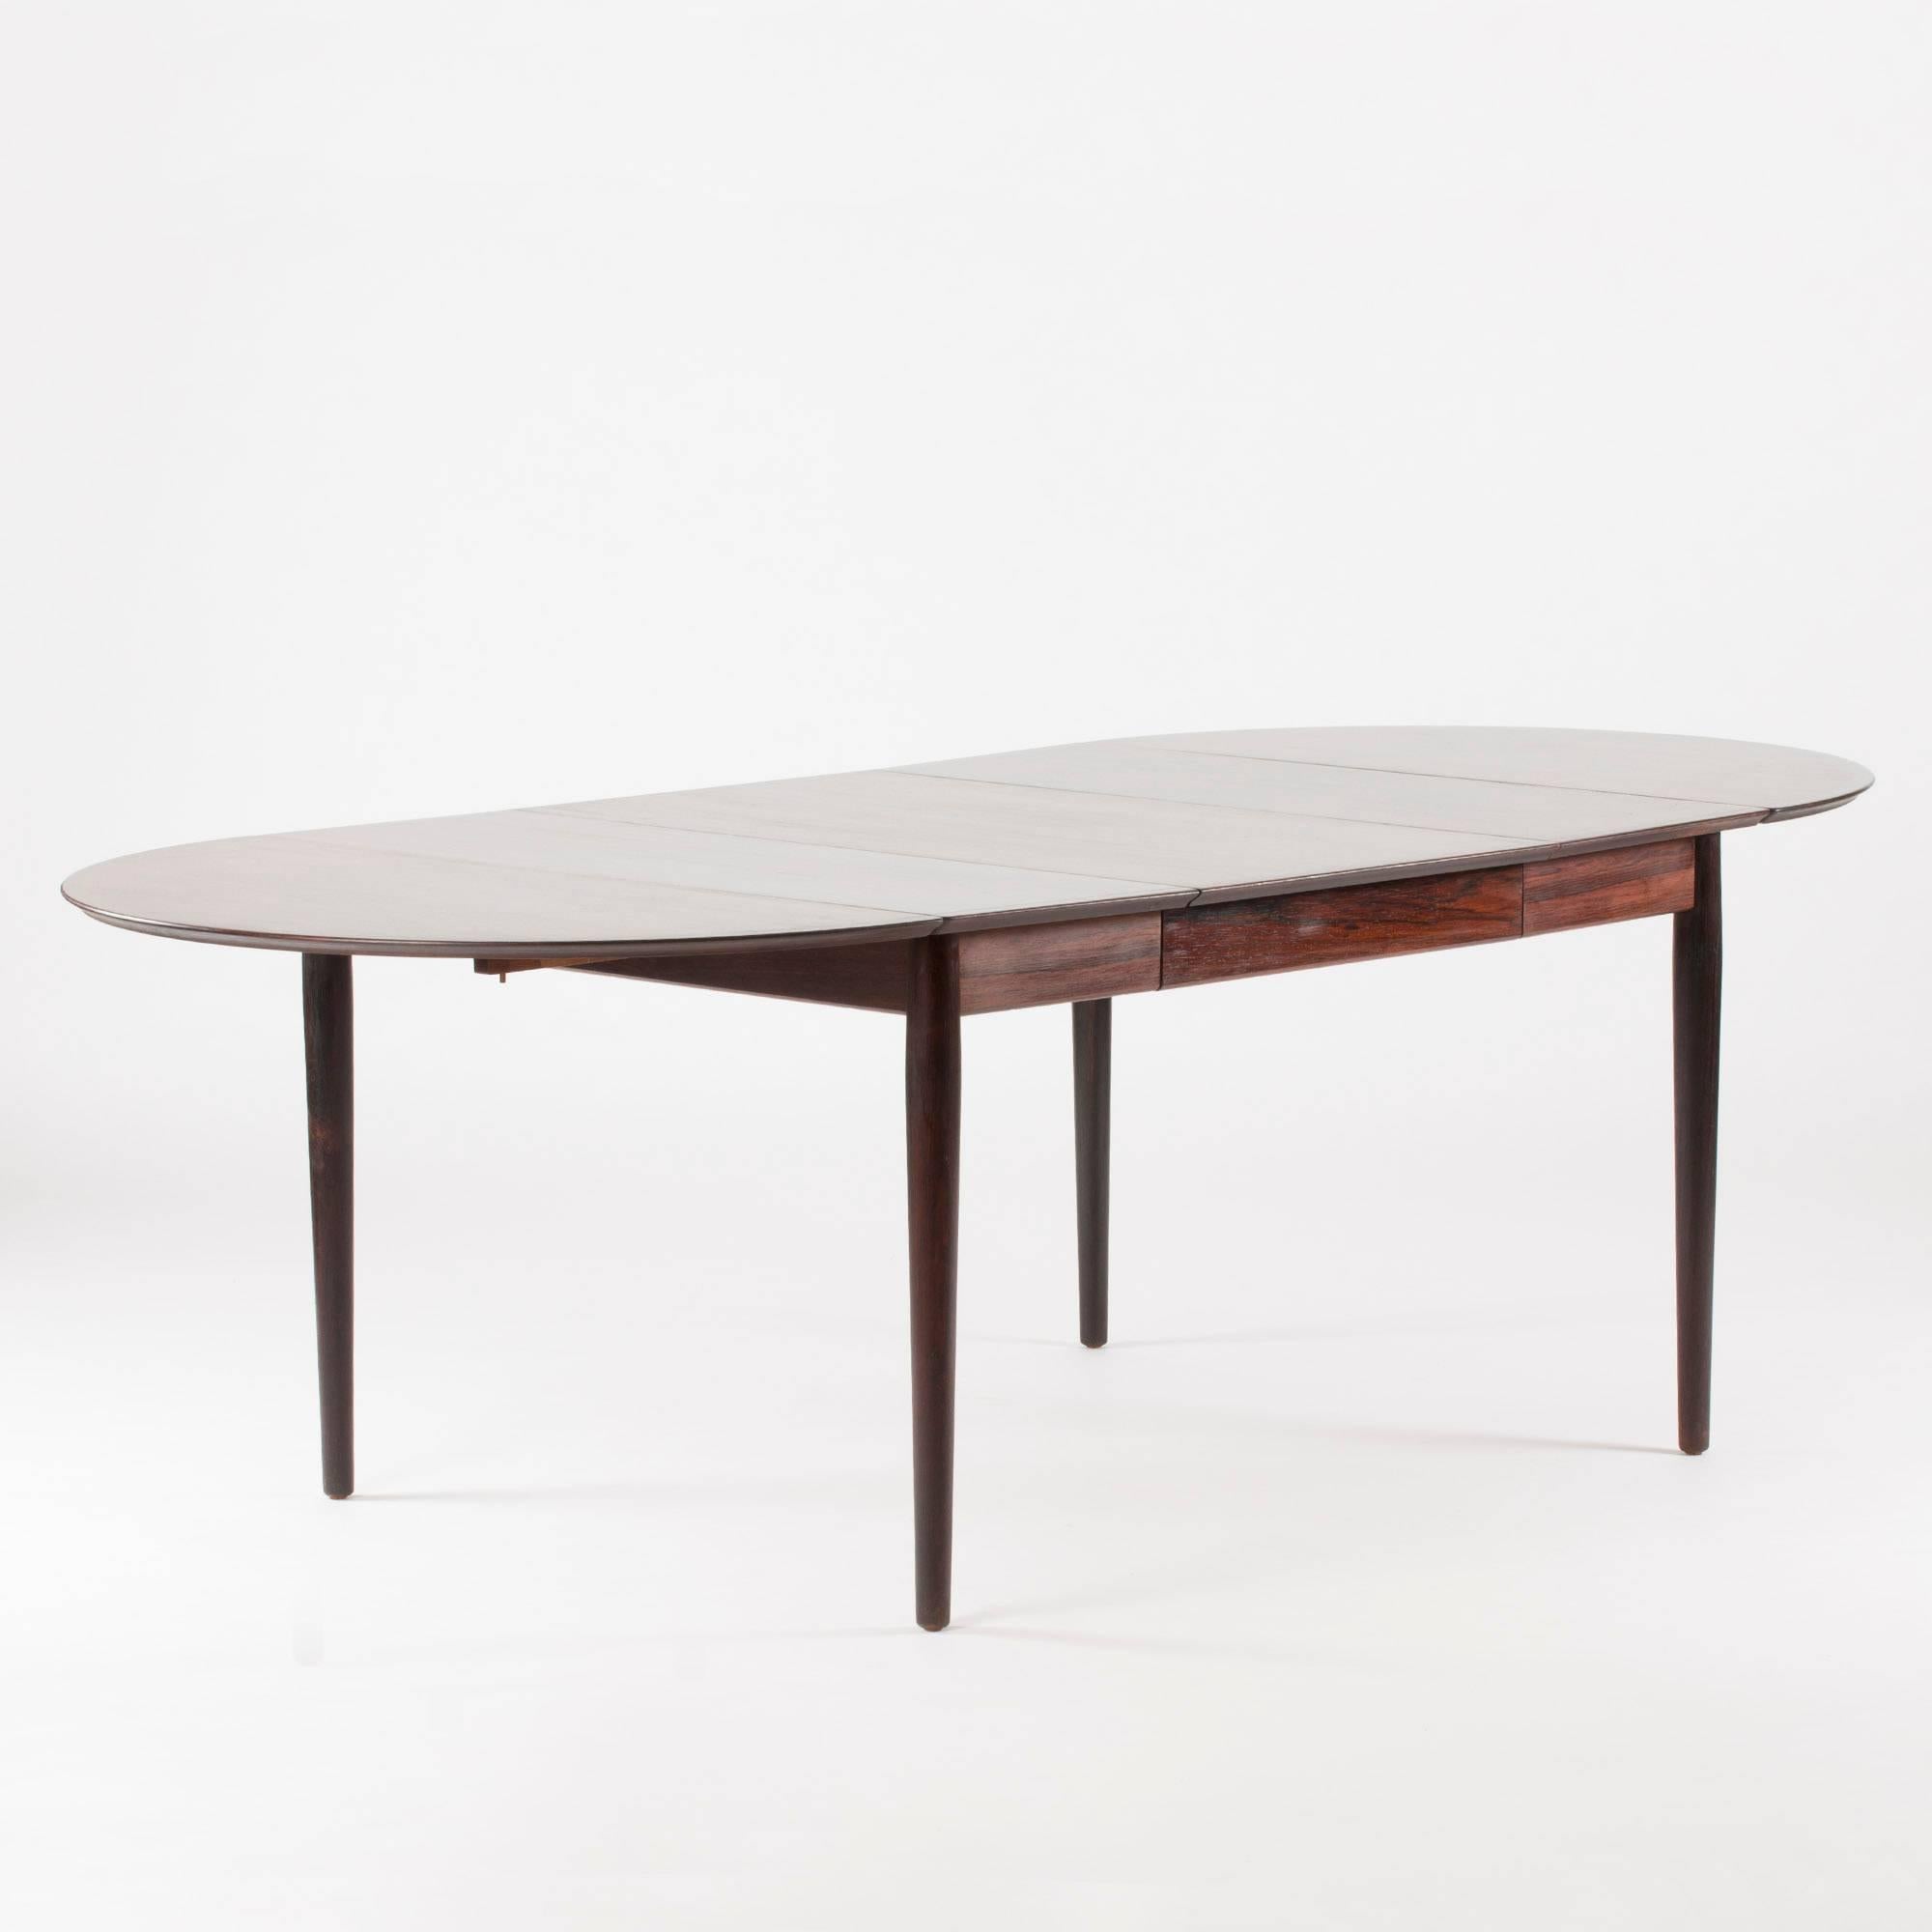 Sleek rosewood dining table by Arne Vodder, with removable drop leaves and two extra leaves. The total length with both extra leaves is 290 cm.